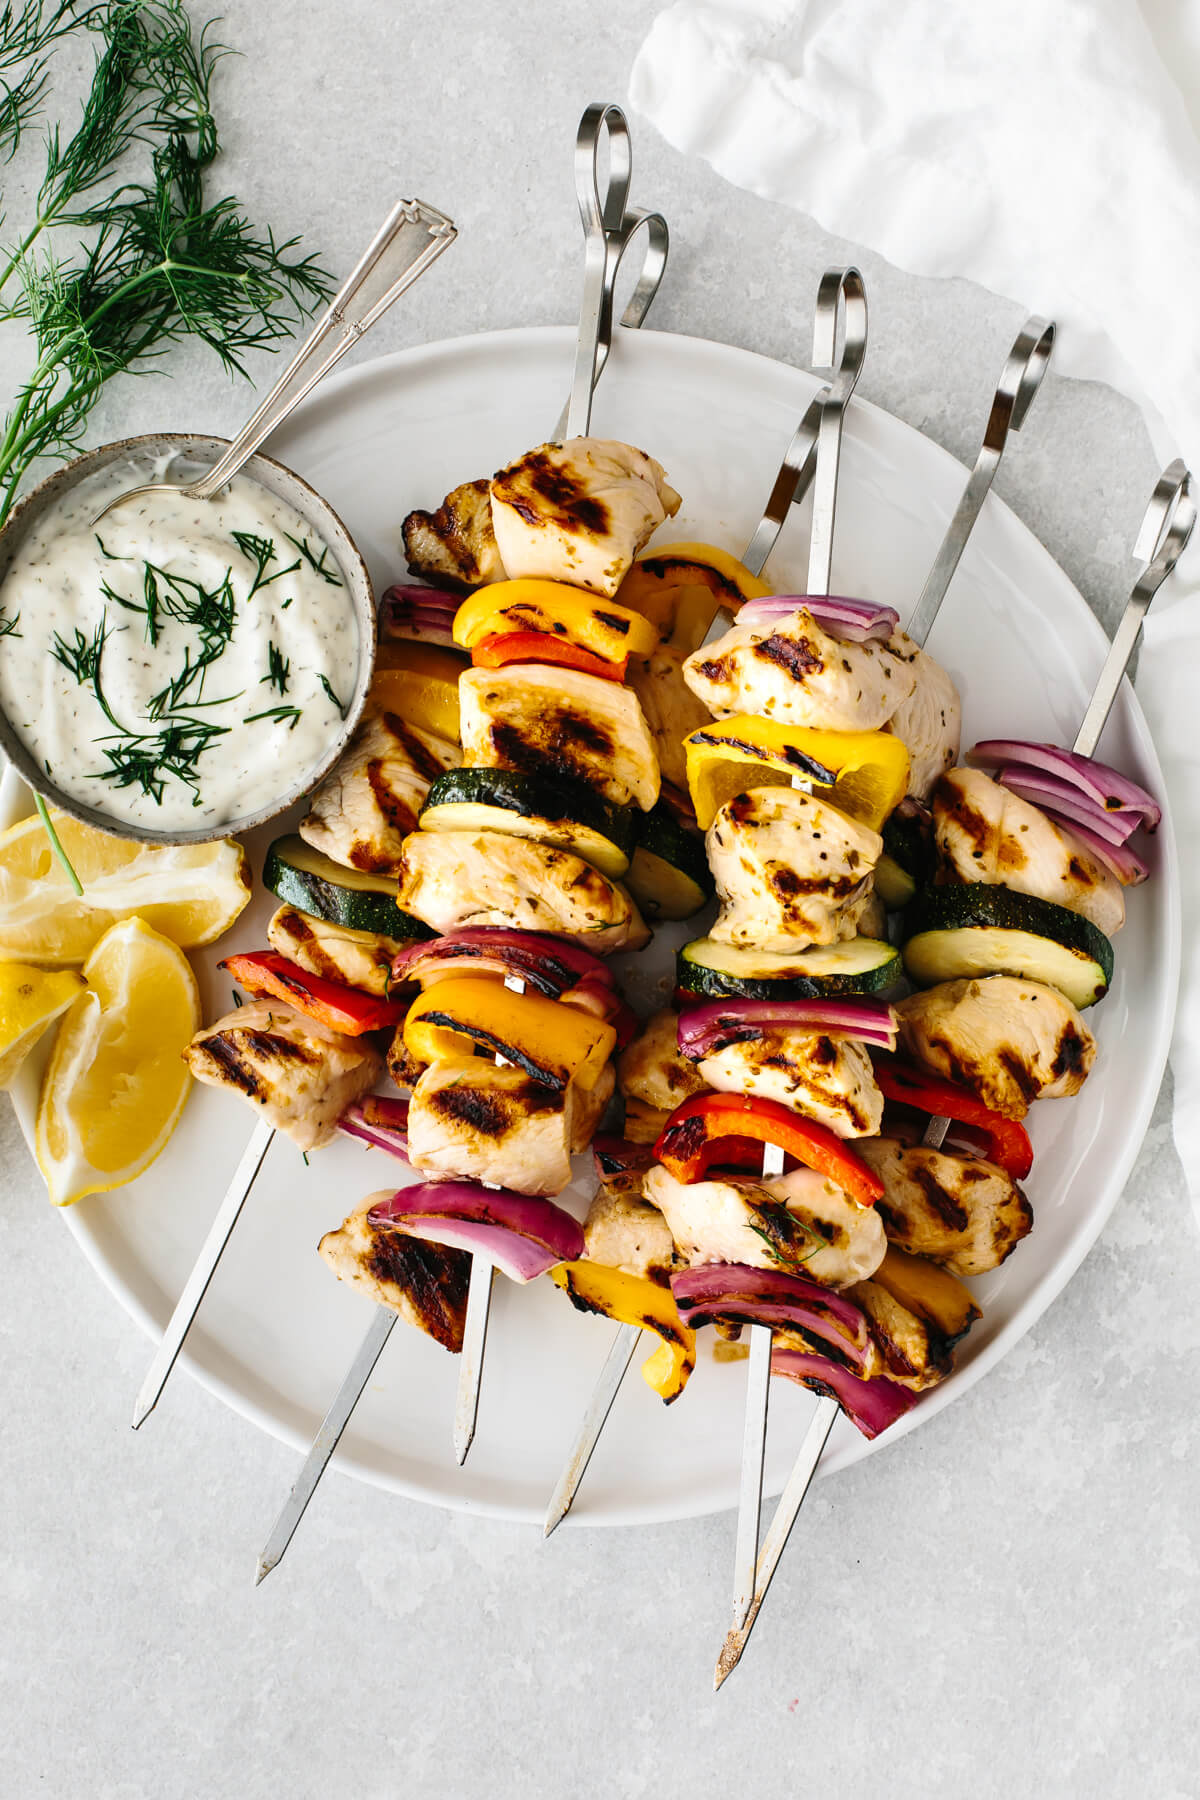 A plate full of cooked chicken kebabs, next to tzatziki sauce.